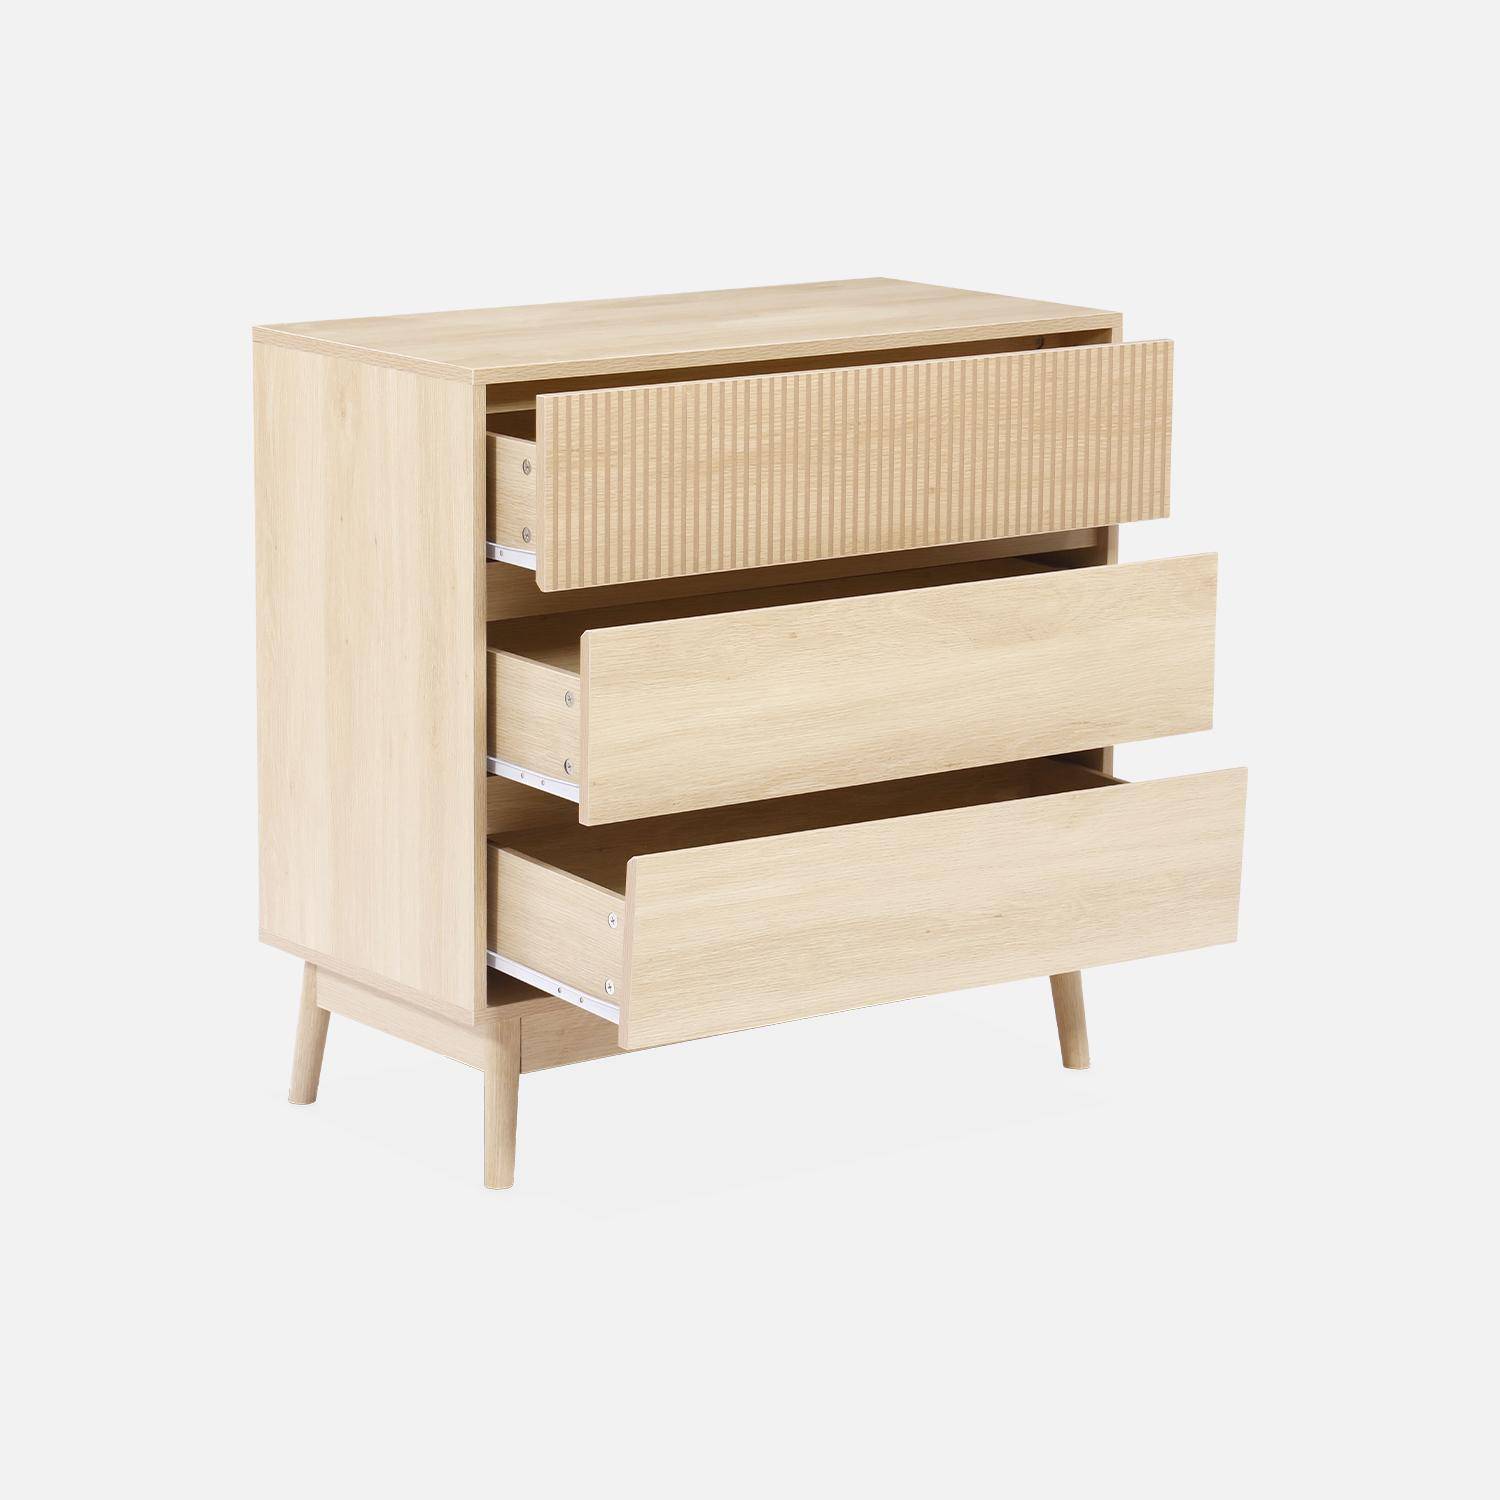 Grooved wood detail 3-drawer chest, 80x40x80cm - Linear - Natural Wood colour Photo5